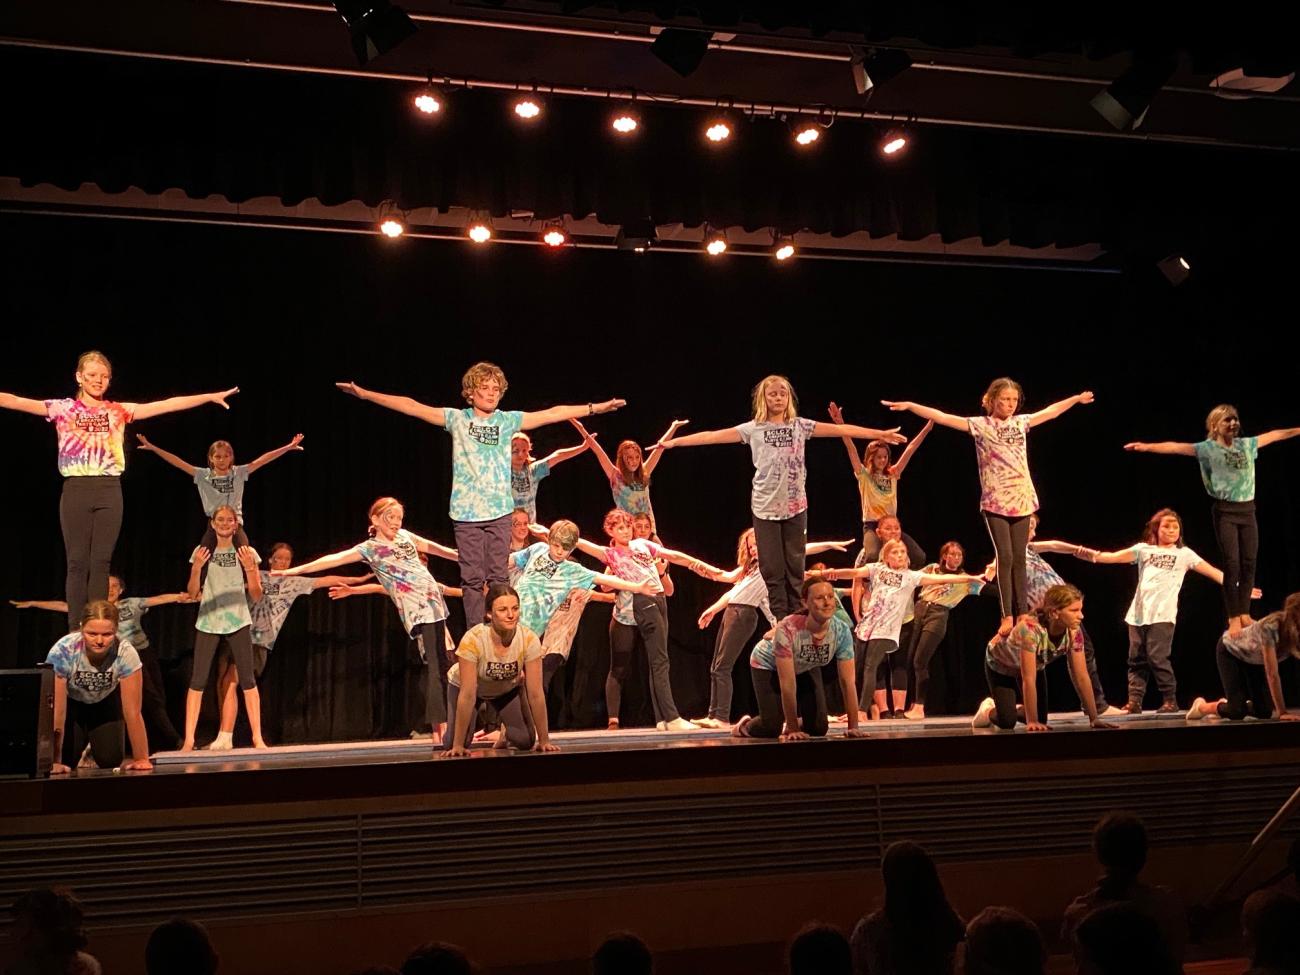 group of students performing adagio - one student on all 4's with partner standing on their back with arms outstretched